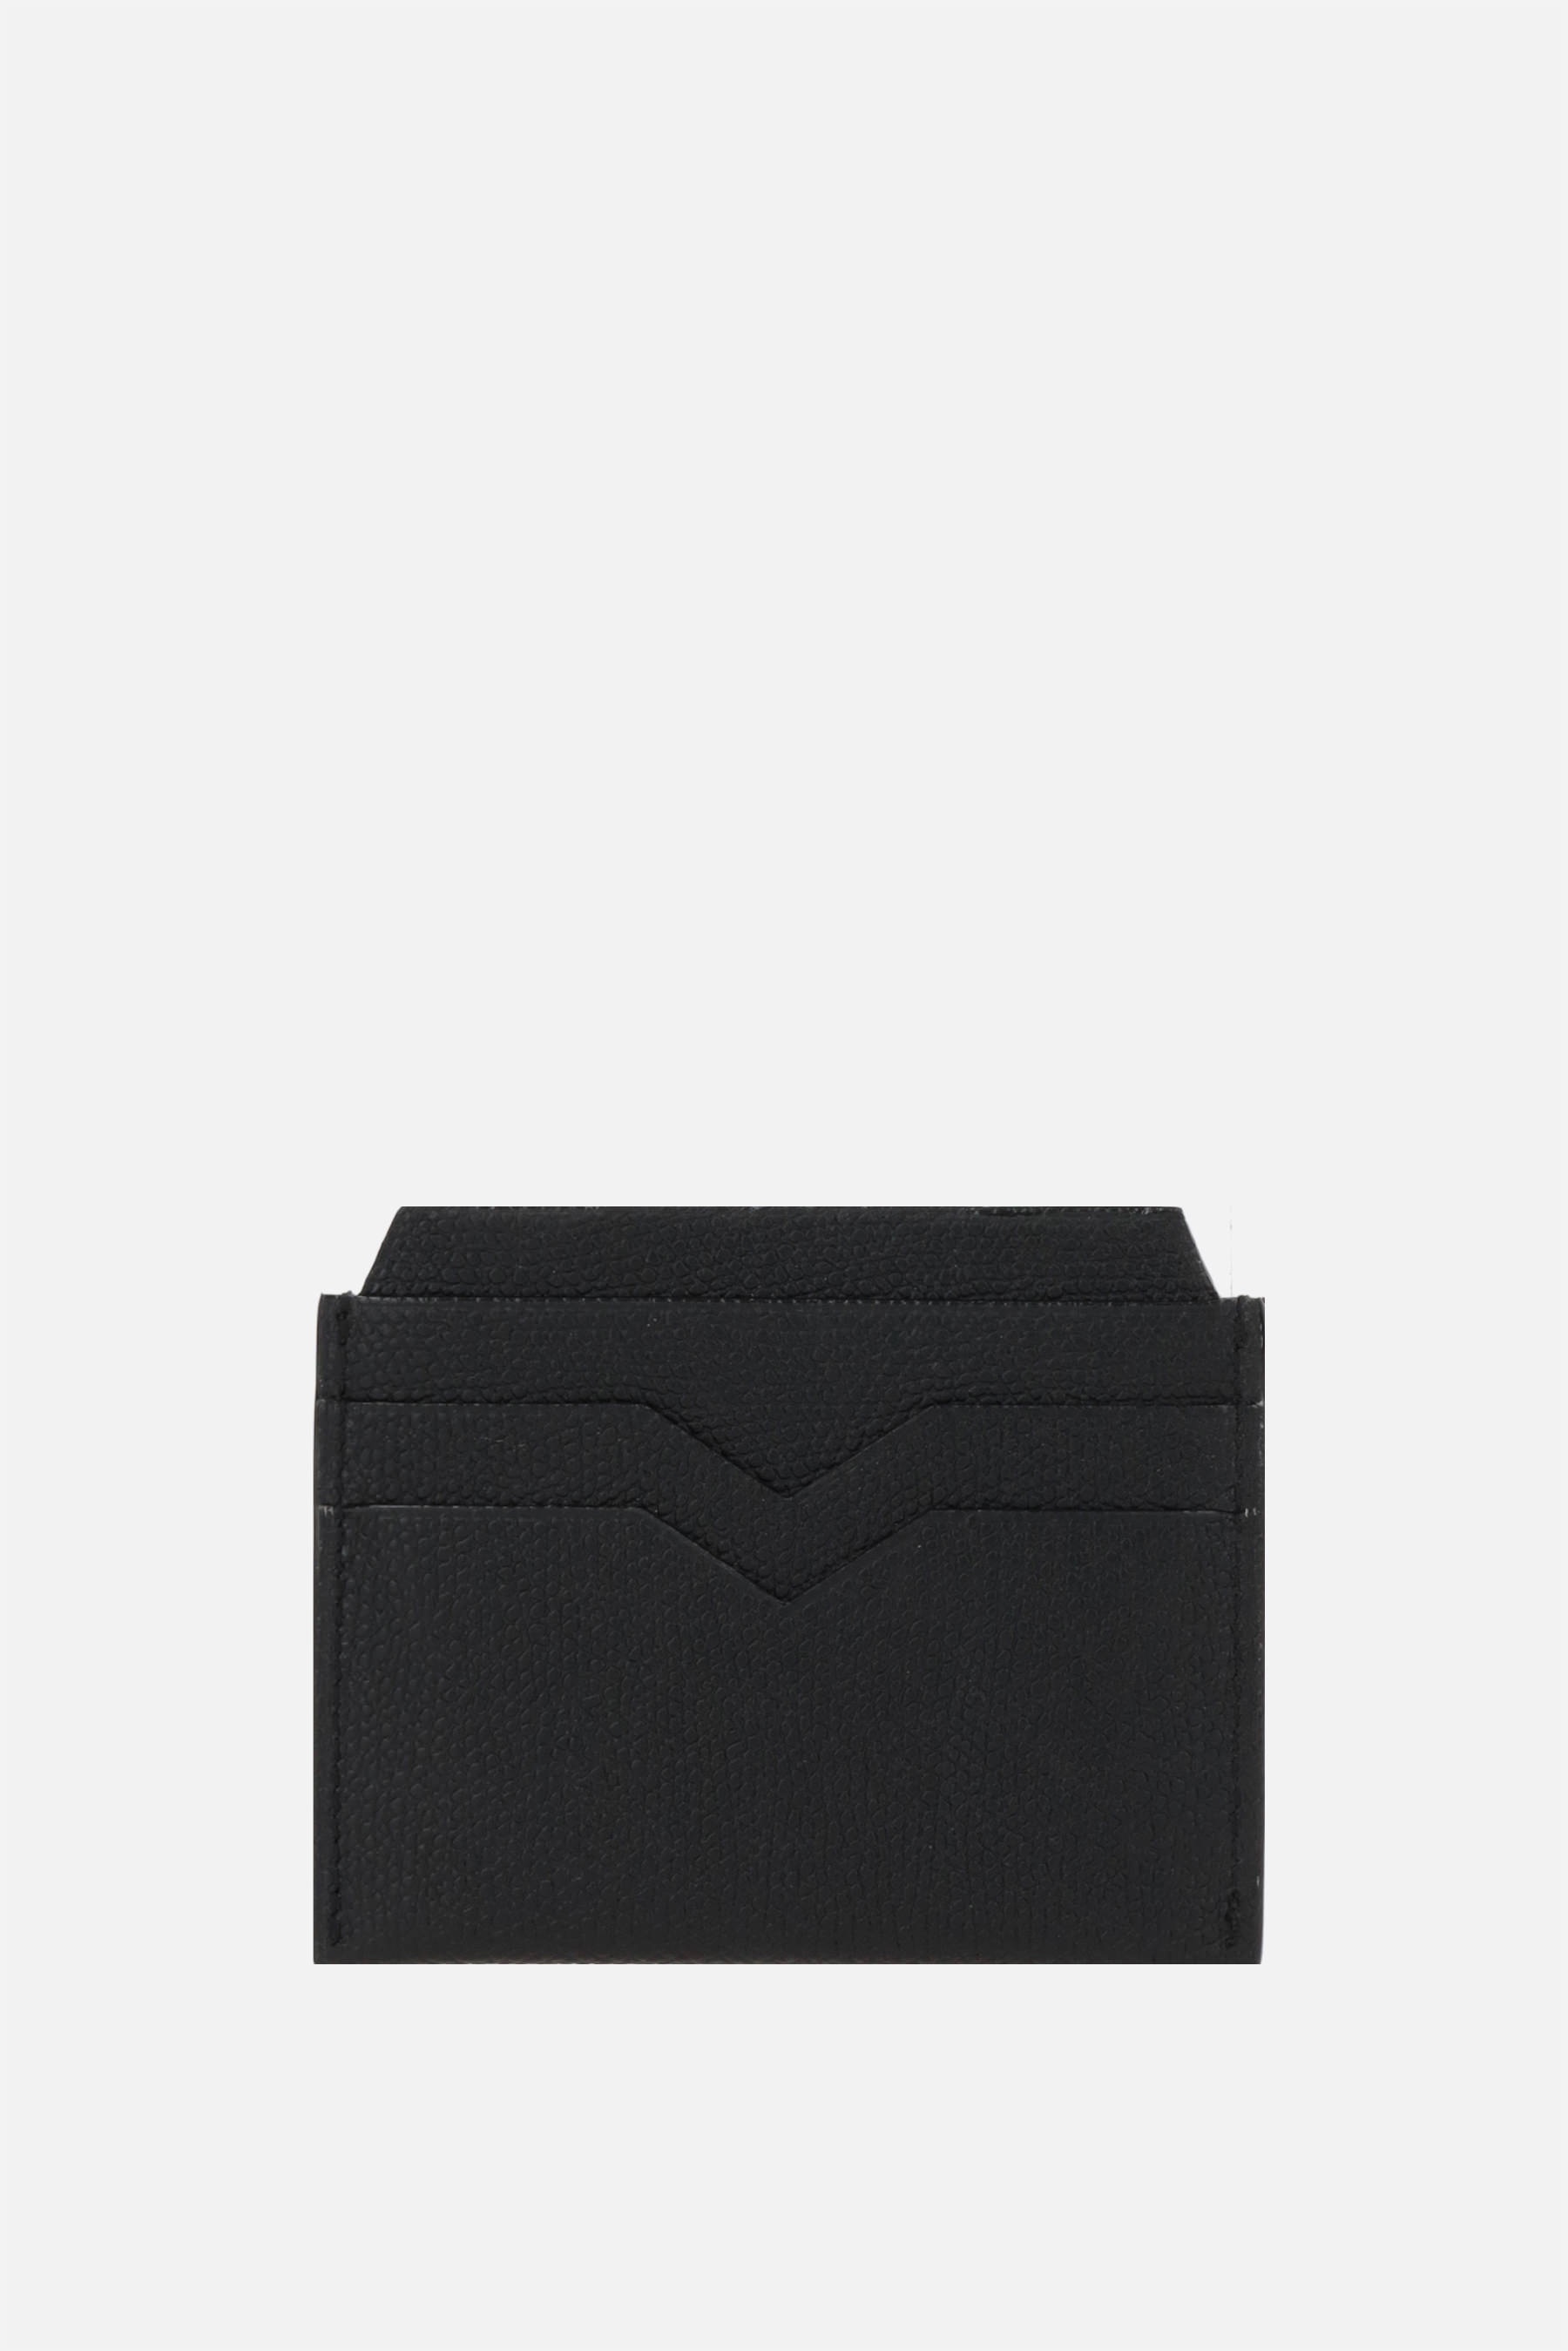 GRAINY LEATHER CARD CASE - 3